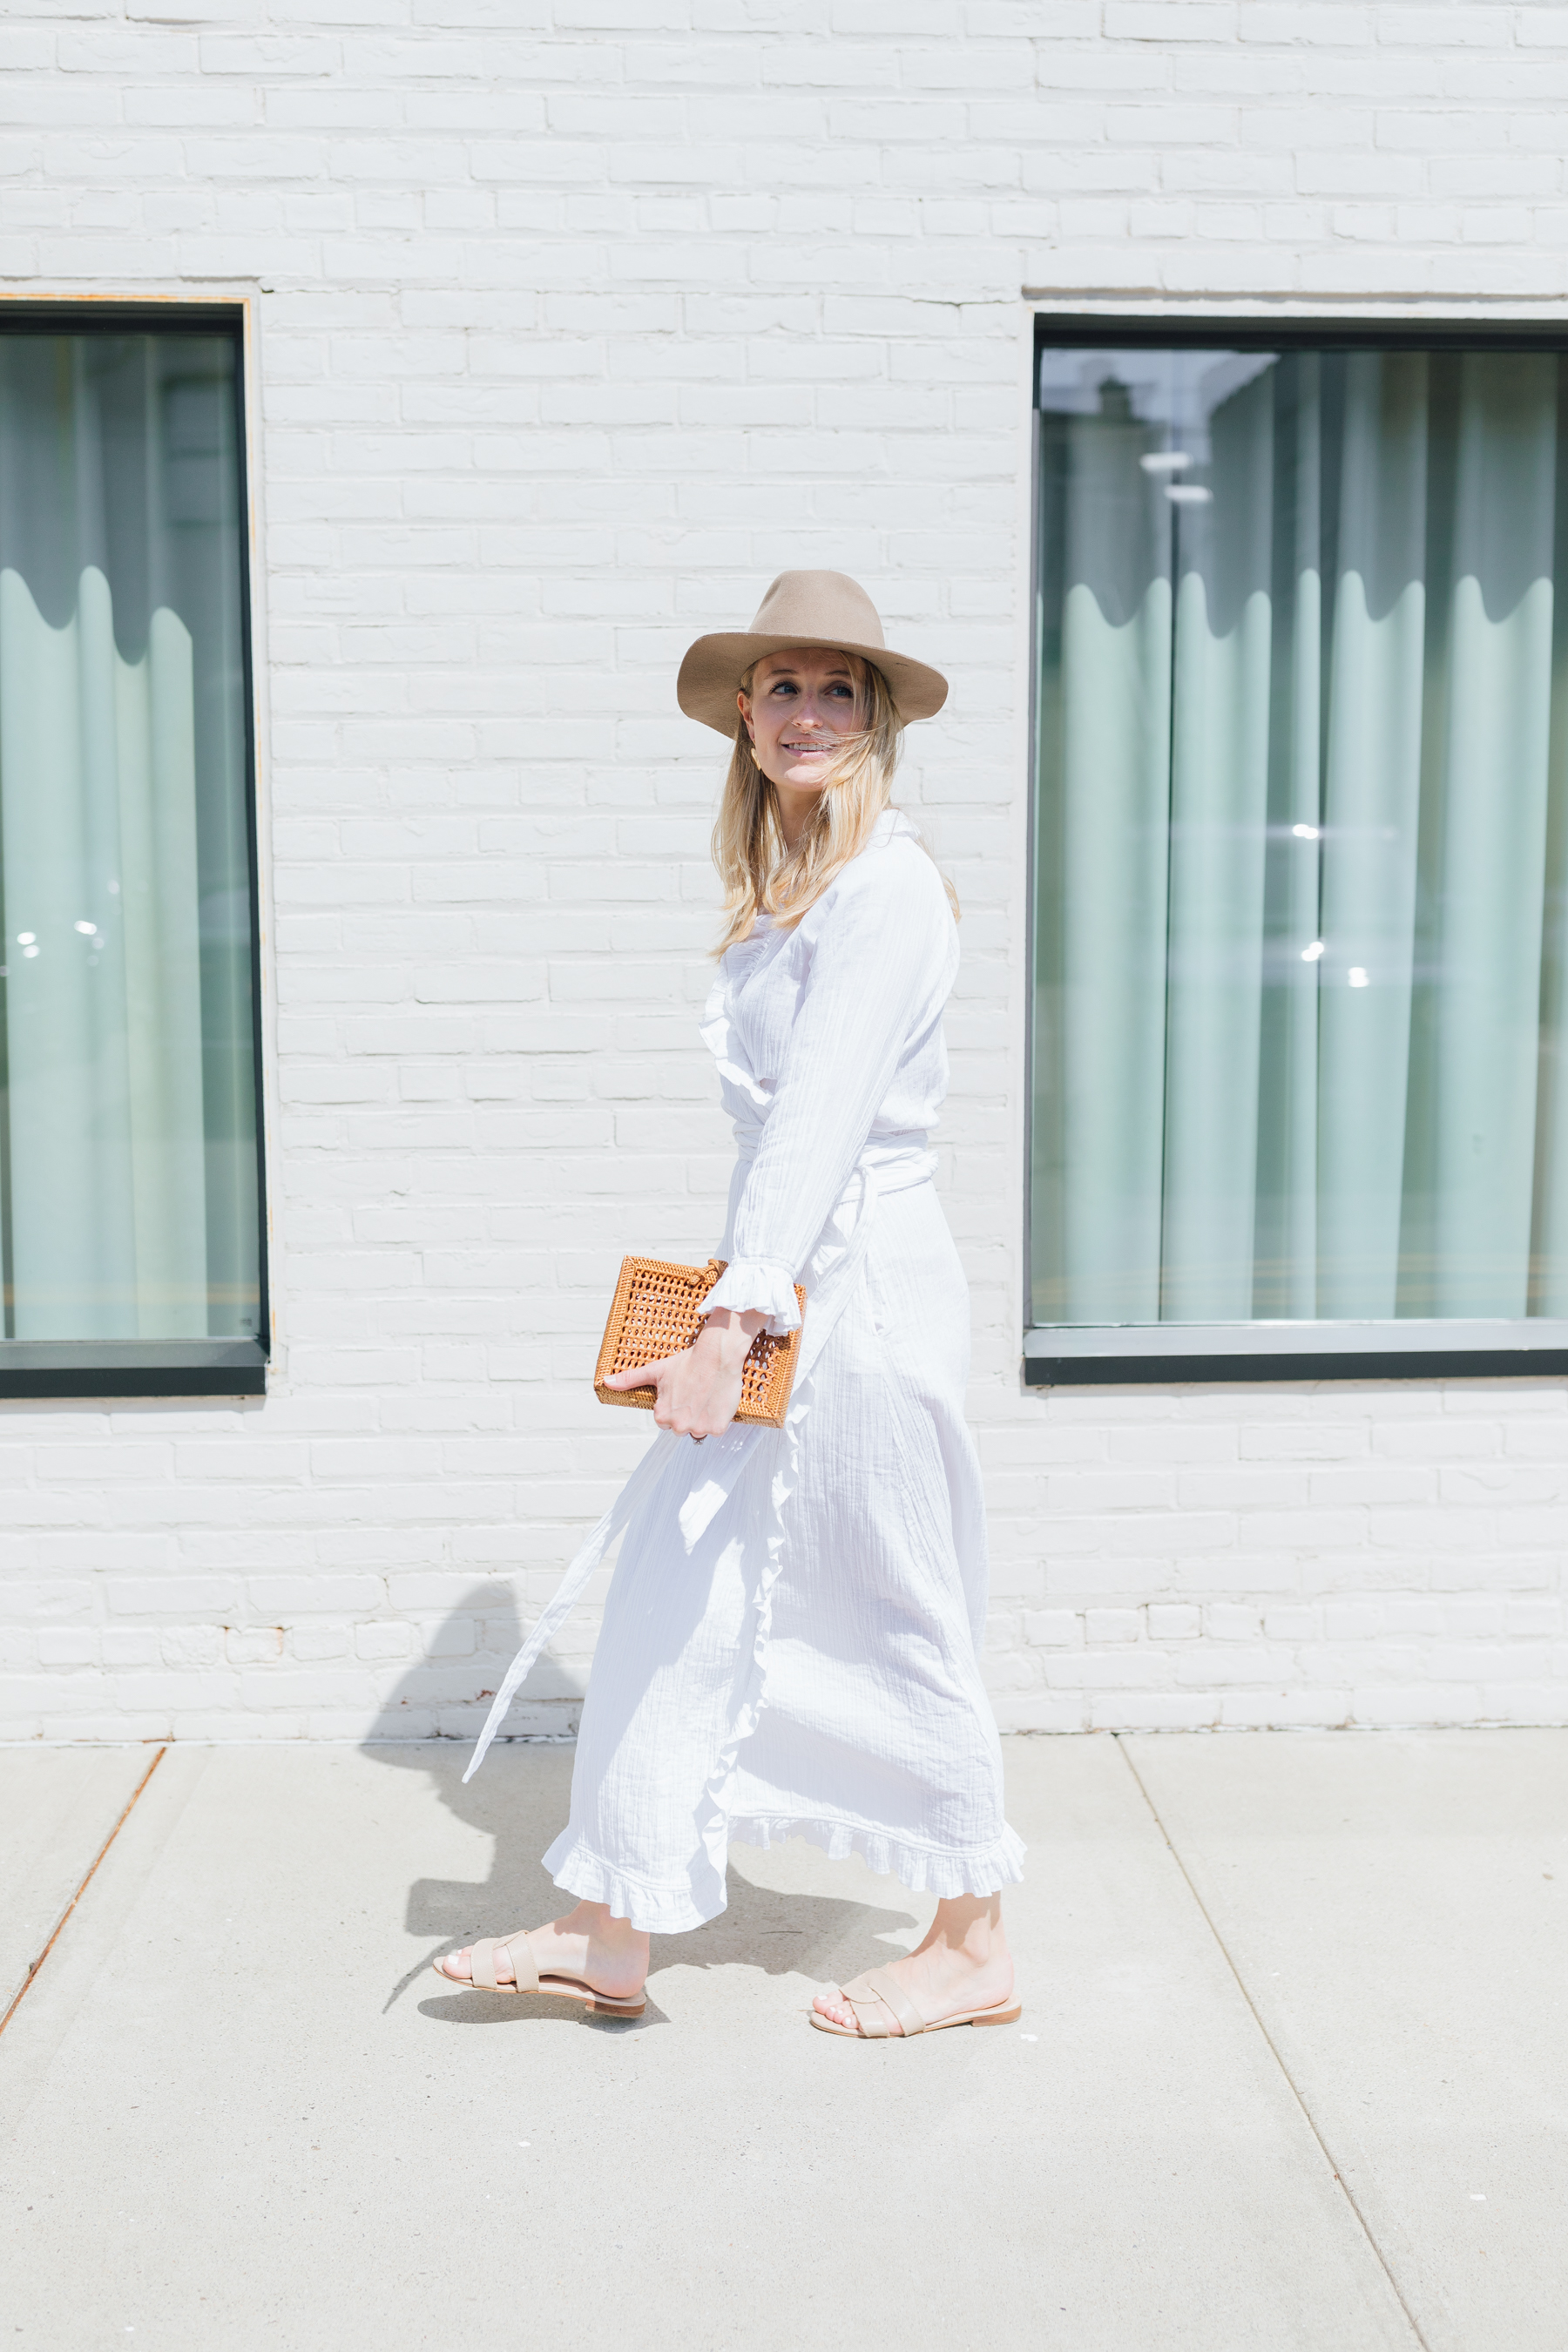 Cindy Trotta from Cindy Hattersley in Rhode Resort Dress // How to style a hat for summer // White dress for summer